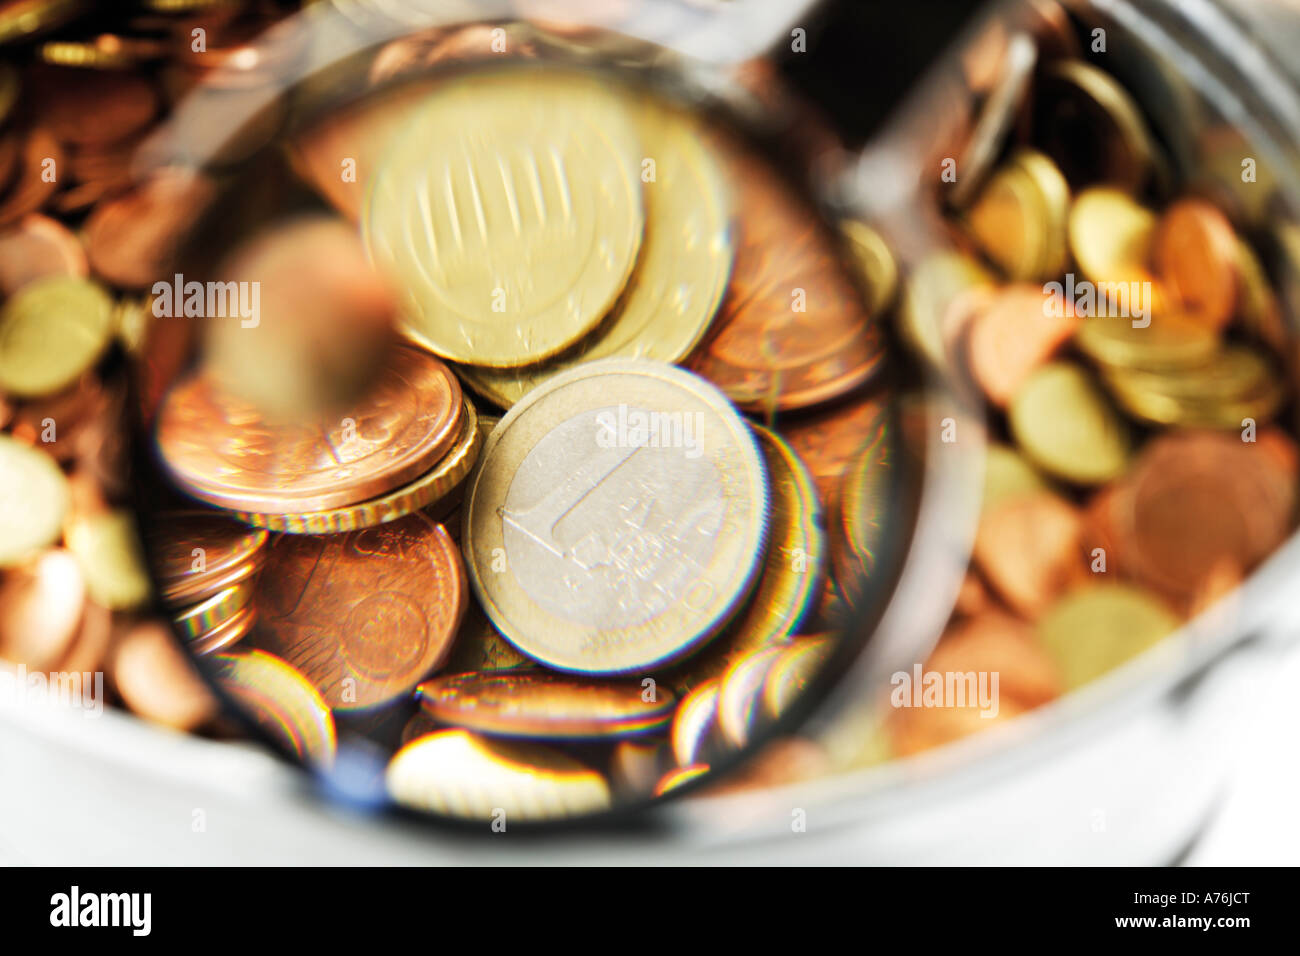 19,136 Money Coins Magnifying Glass Images, Stock Photos, 3D objects, &  Vectors